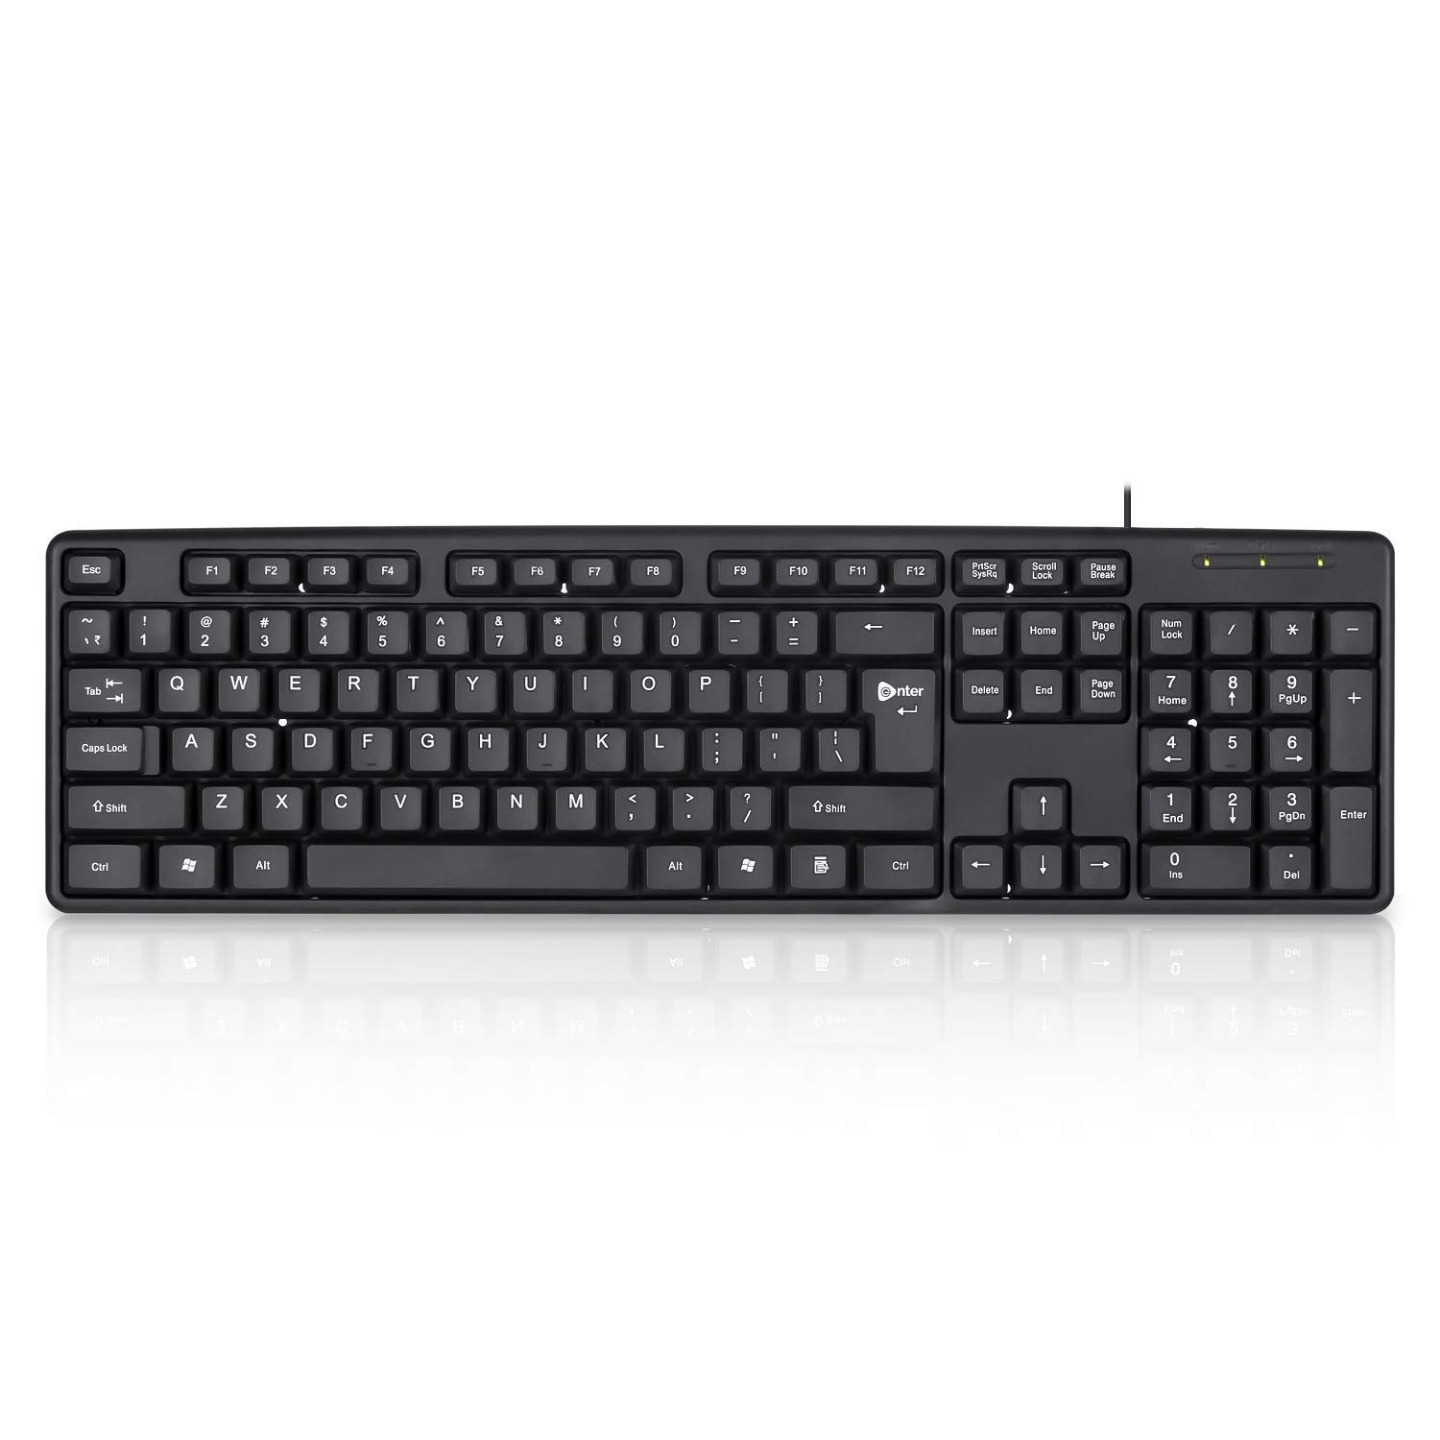 Enter Pinnacle USB Wired Keyboard for Laptop and Desktop